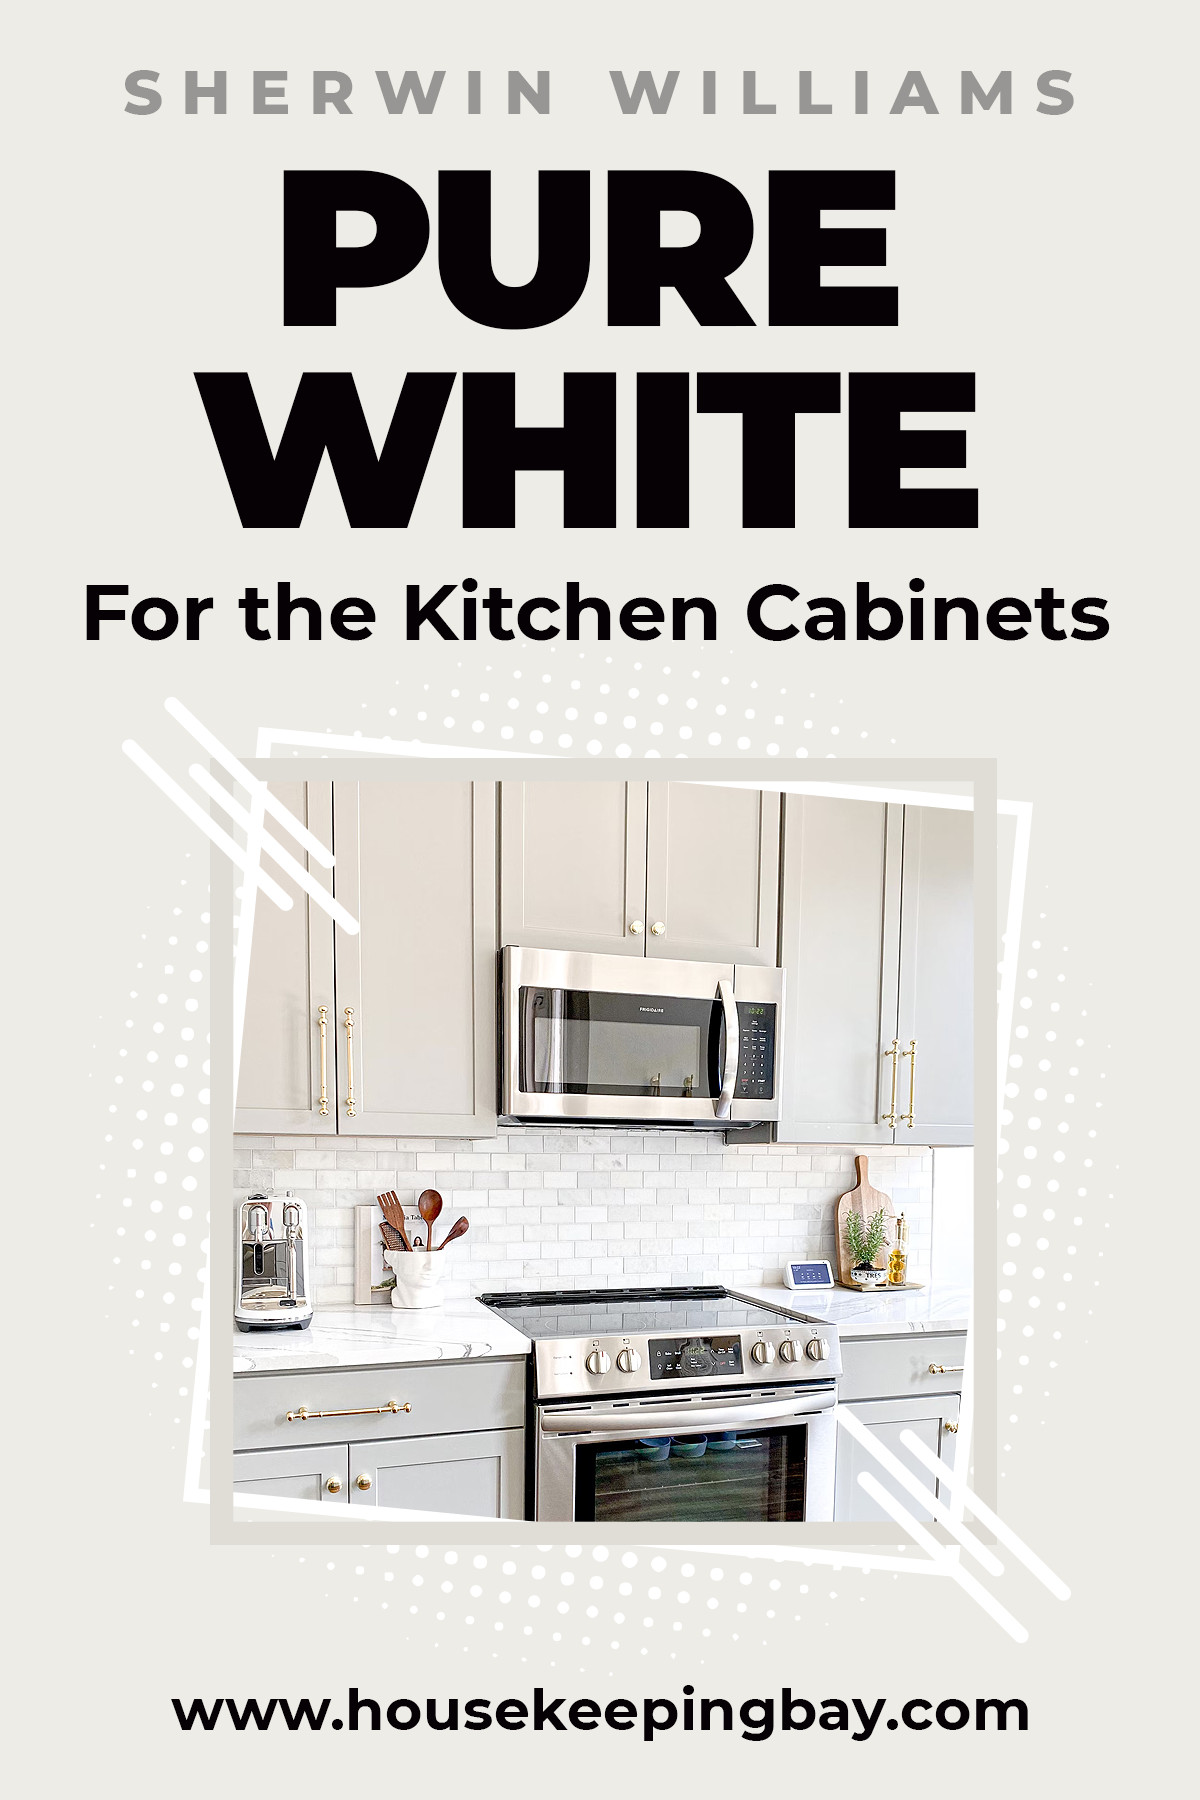 Pure White for the kitchen cabinets